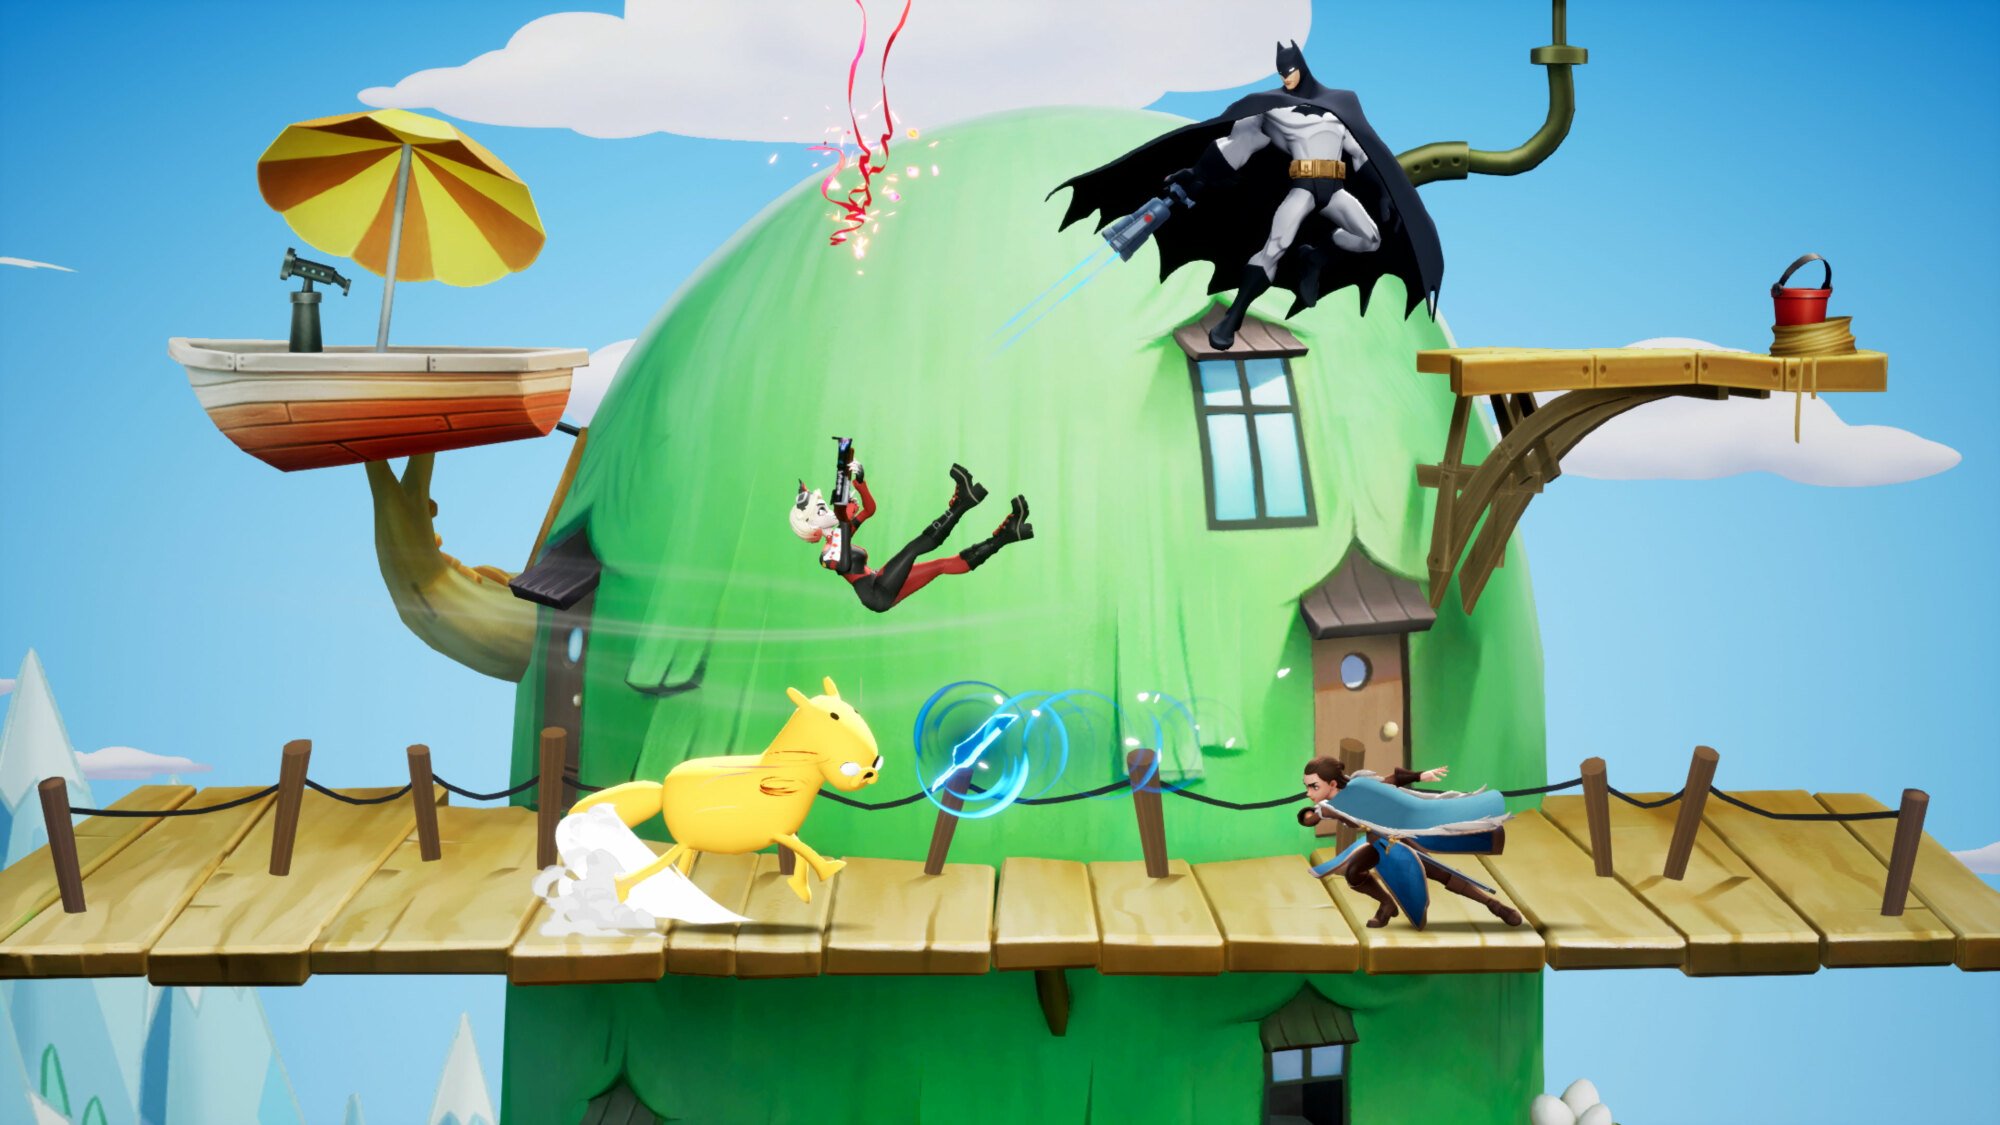 A screenshot from "MultiVersus" of a match in progress. Batman is fighting with Harley Quinn and Arya Stark is fighting with Jake the Dog (with the body of a horse).